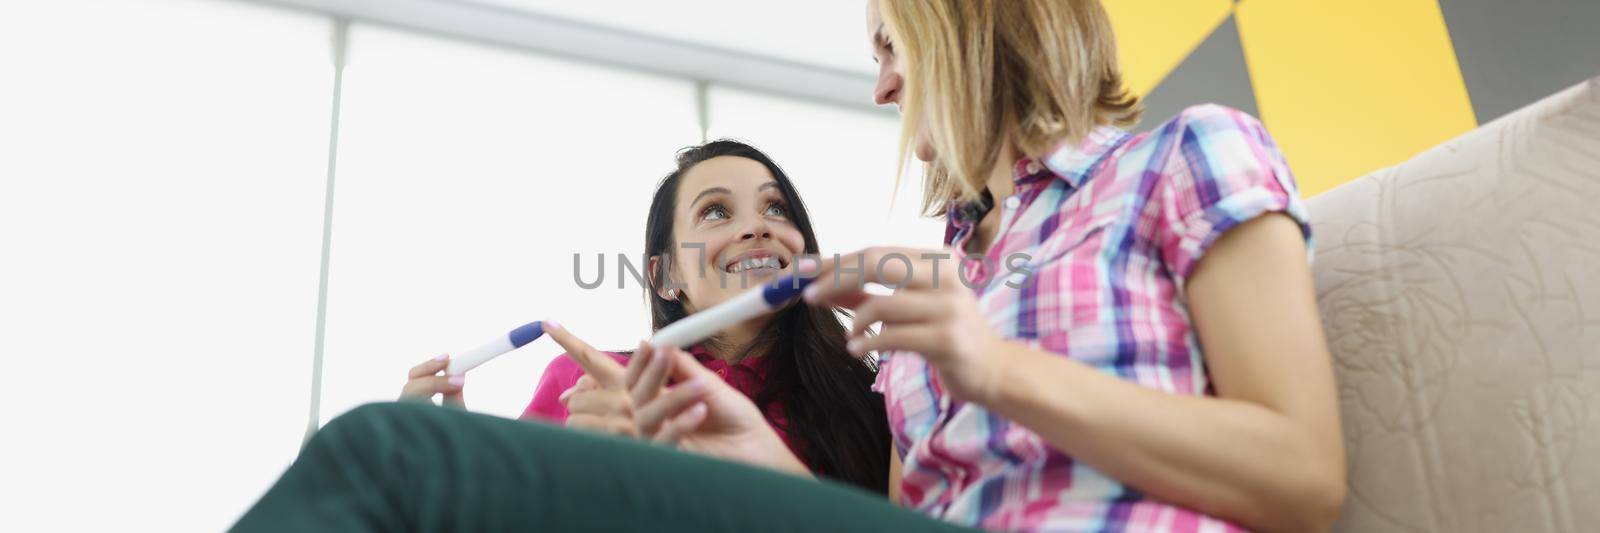 Low angle of friends girls hold pregnancy tests, happy best friends got big news. Smiling women on sofa at home. Friendship, pregnancy, new period, life change, happiness concept